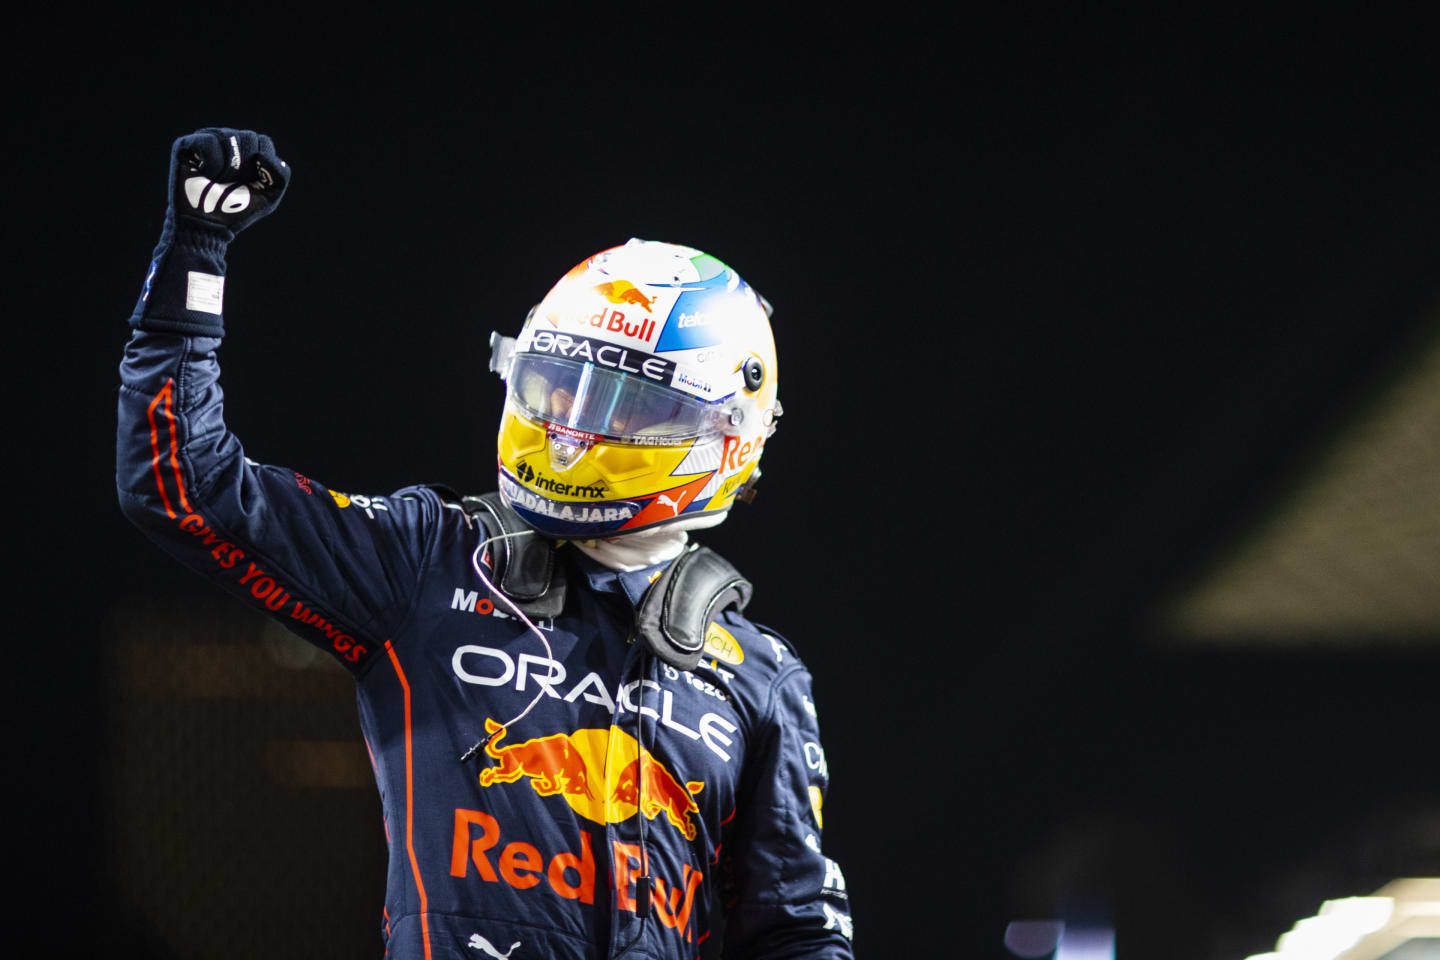 JEDDAH, SAUDI ARABIA - MARCH 26: Pole position qualifier Sergio Perez of Mexico and Oracle Red Bull Racing celebrates in parc ferme during qualifying ahead of the F1 Grand Prix of Saudi Arabia at the Jeddah Corniche Circuit on March 26, 2022 in Jeddah, Saudi Arabia. (Photo by Dan Istitene - Formula 1/Formula 1 via Getty Images)